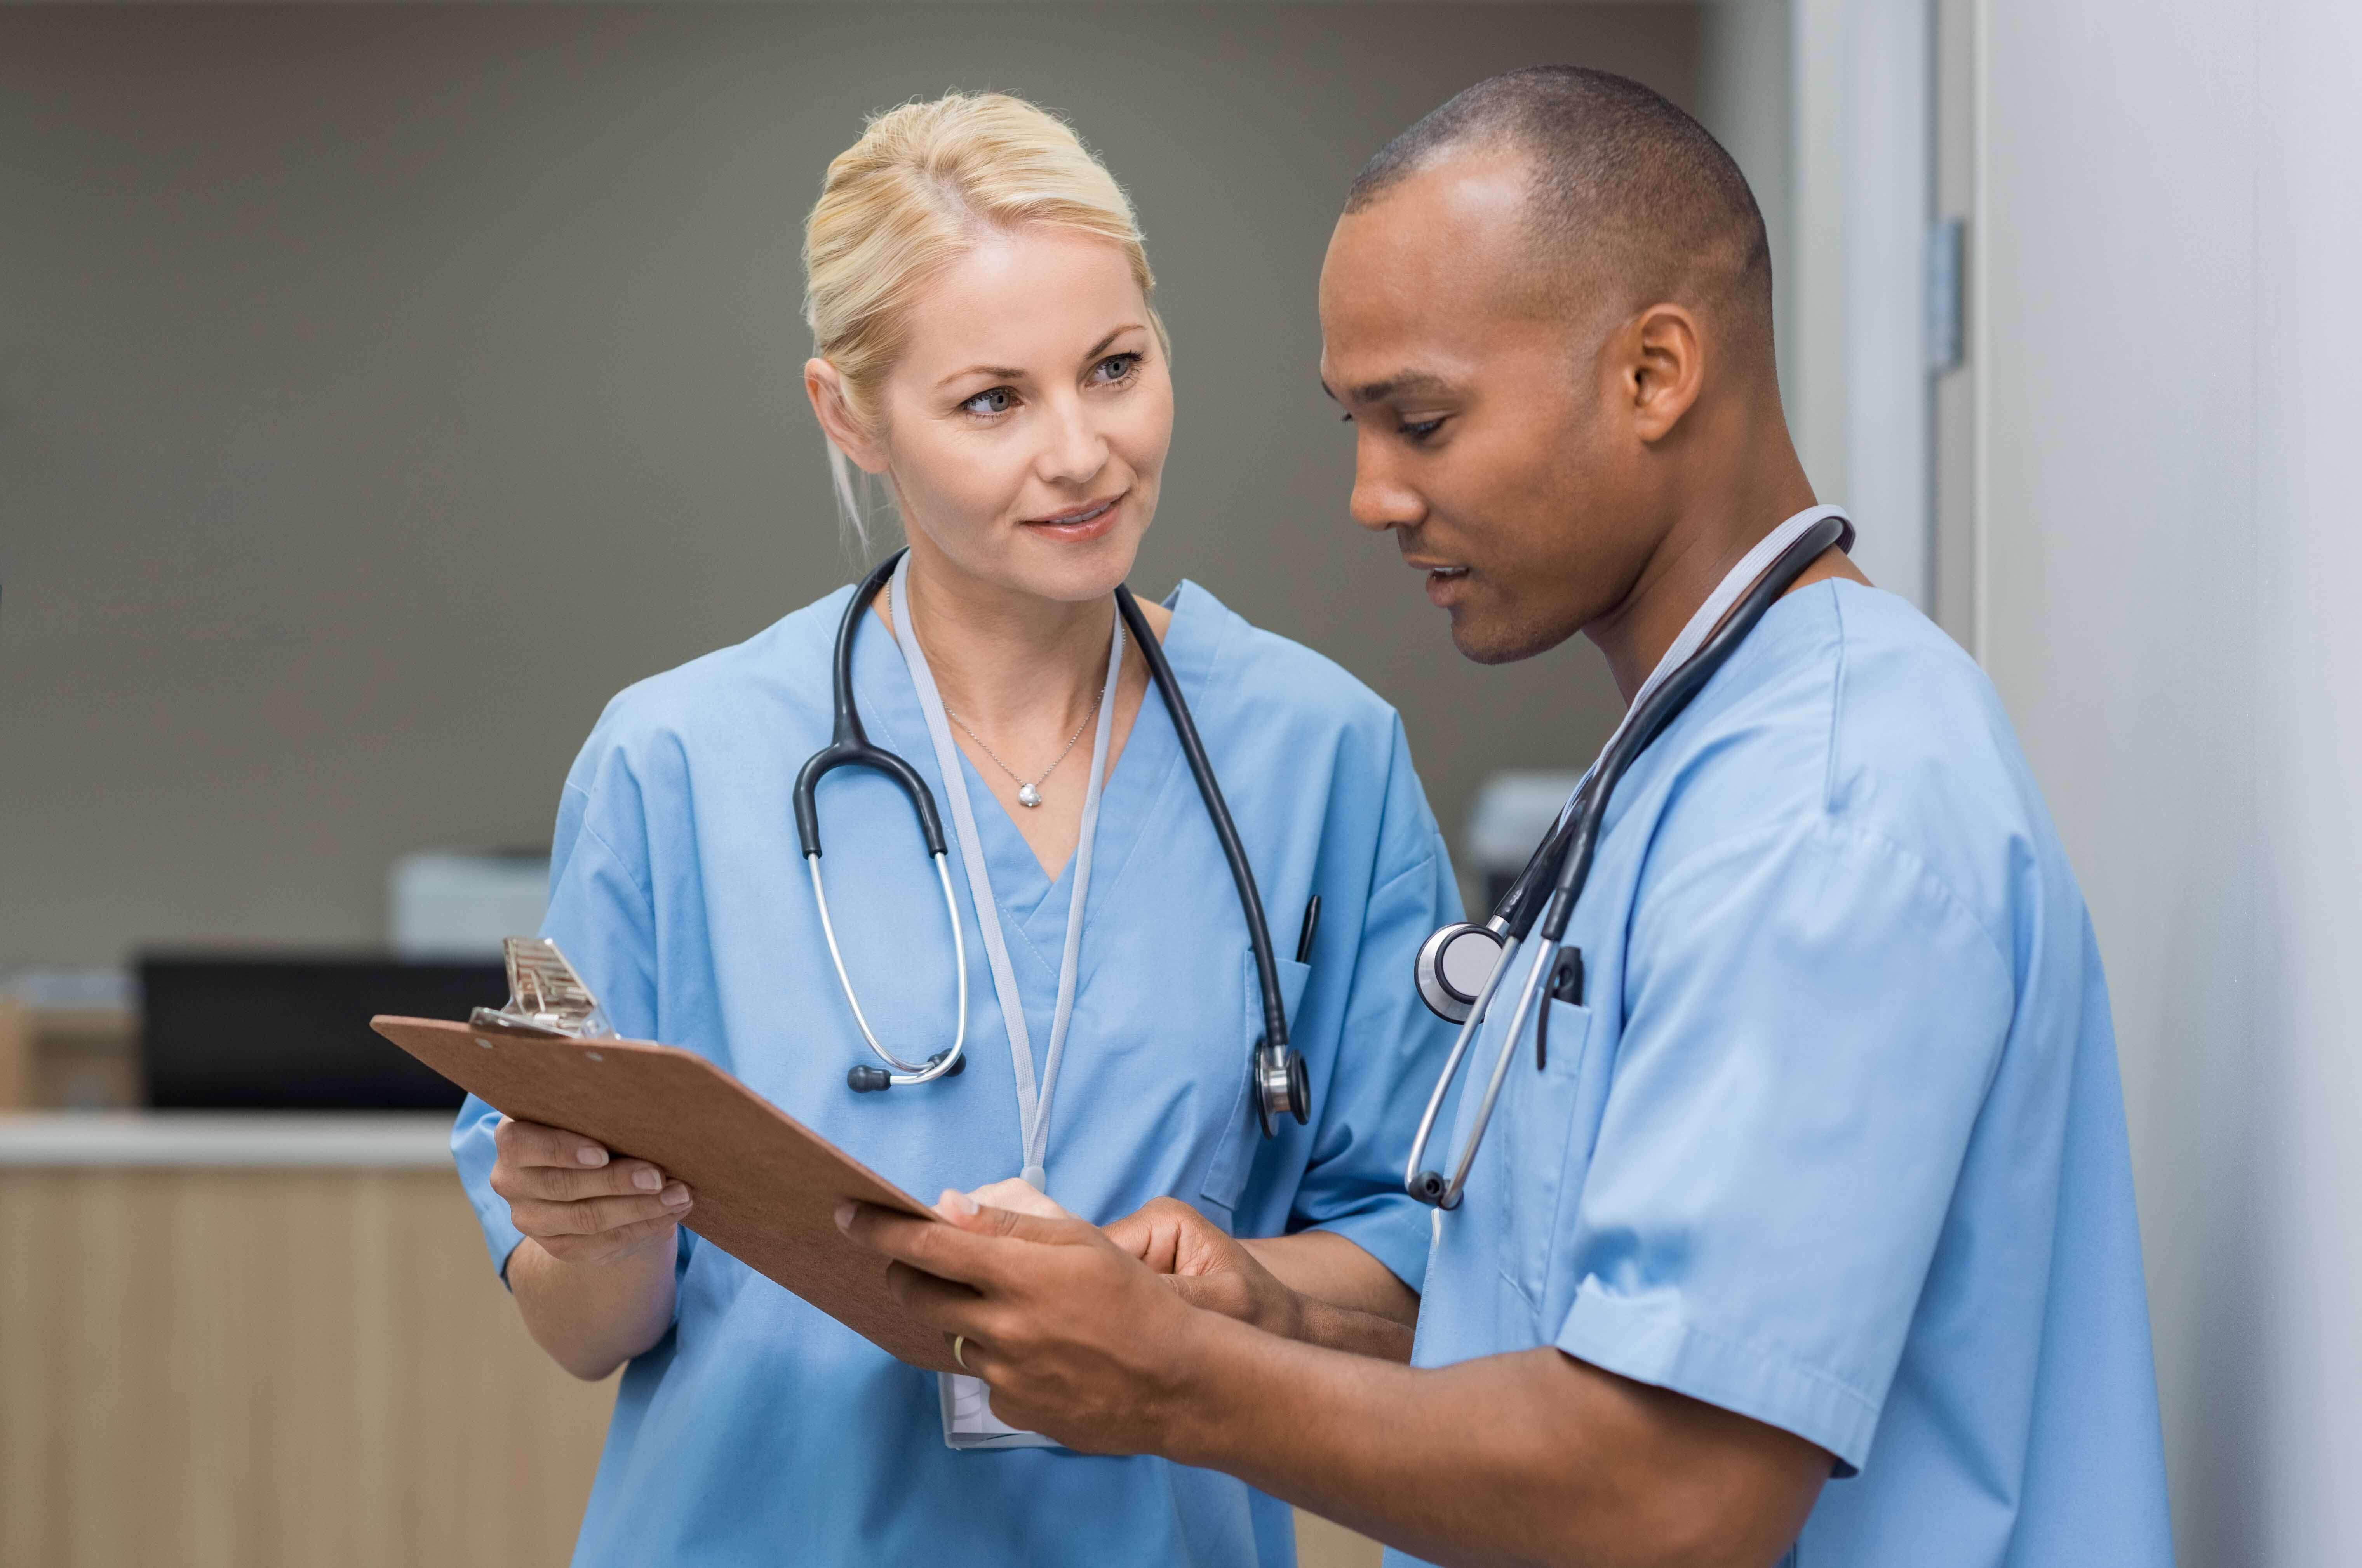 Female nurse leader in blue scrubs holds clipboard with male nurse in blue scrubs, teaching him how to properly log medical records.